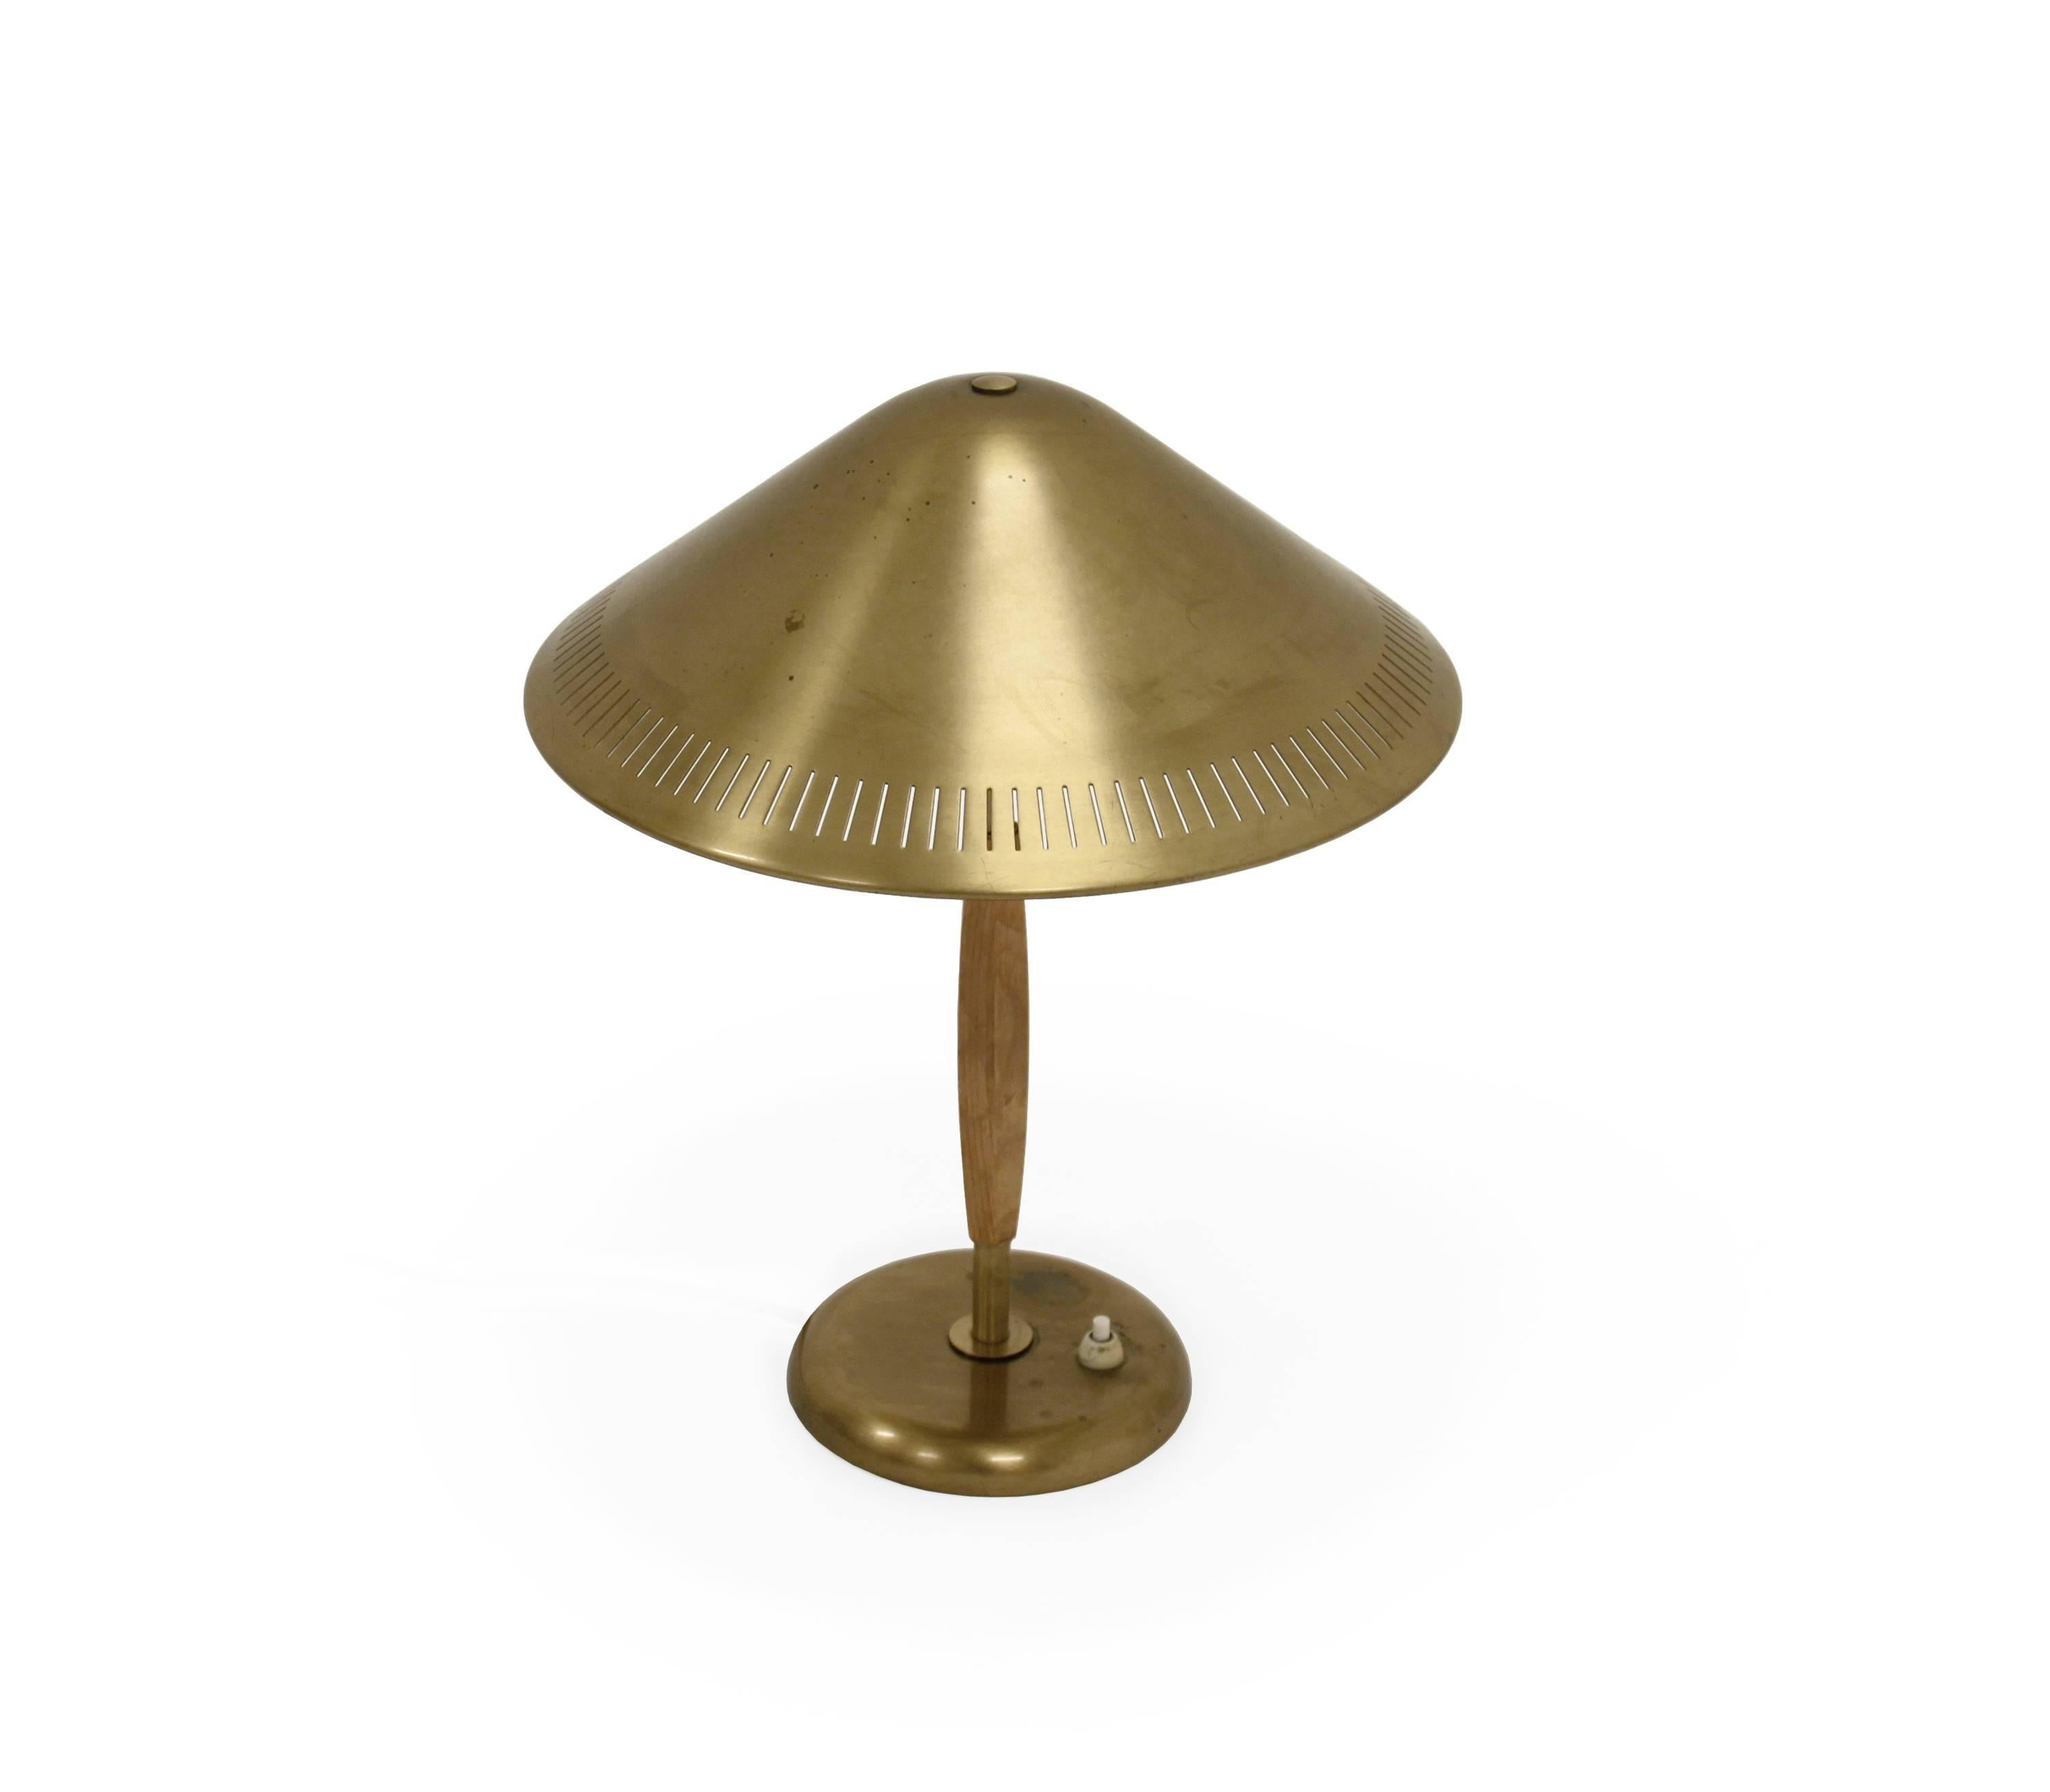 Sublime and wonderful table lamp in brass and beech wood.

Most likely designed and made in Sweden by ASEA from circa 1960s second half.

The lamp is fully working and in good vintage condition. Minor wear and normal signs of surface patina.